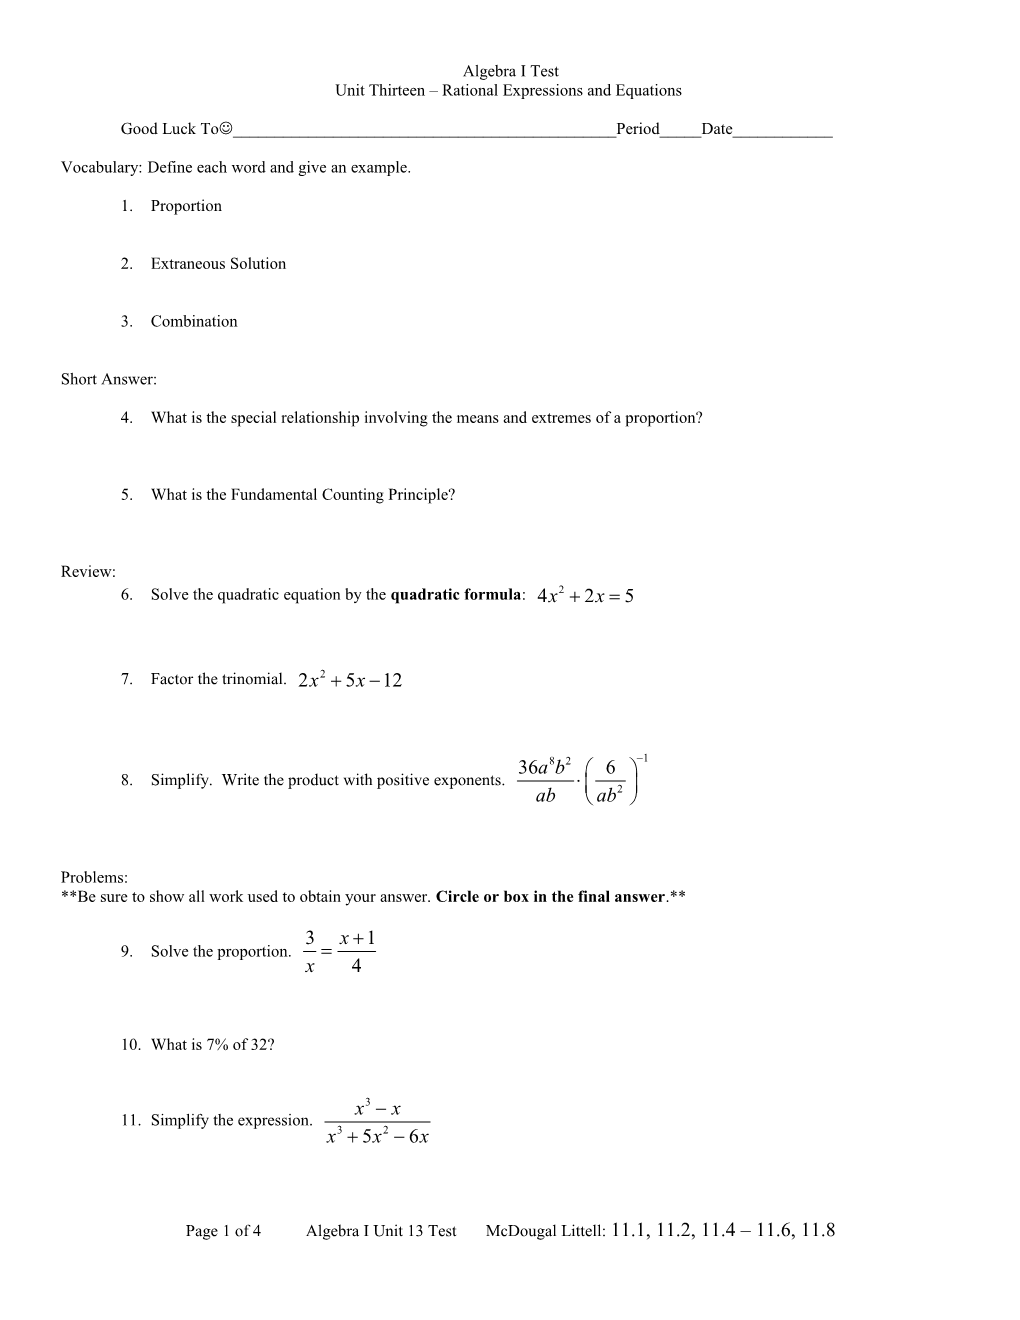 Unit Thirteen Rational Expressions and Equations